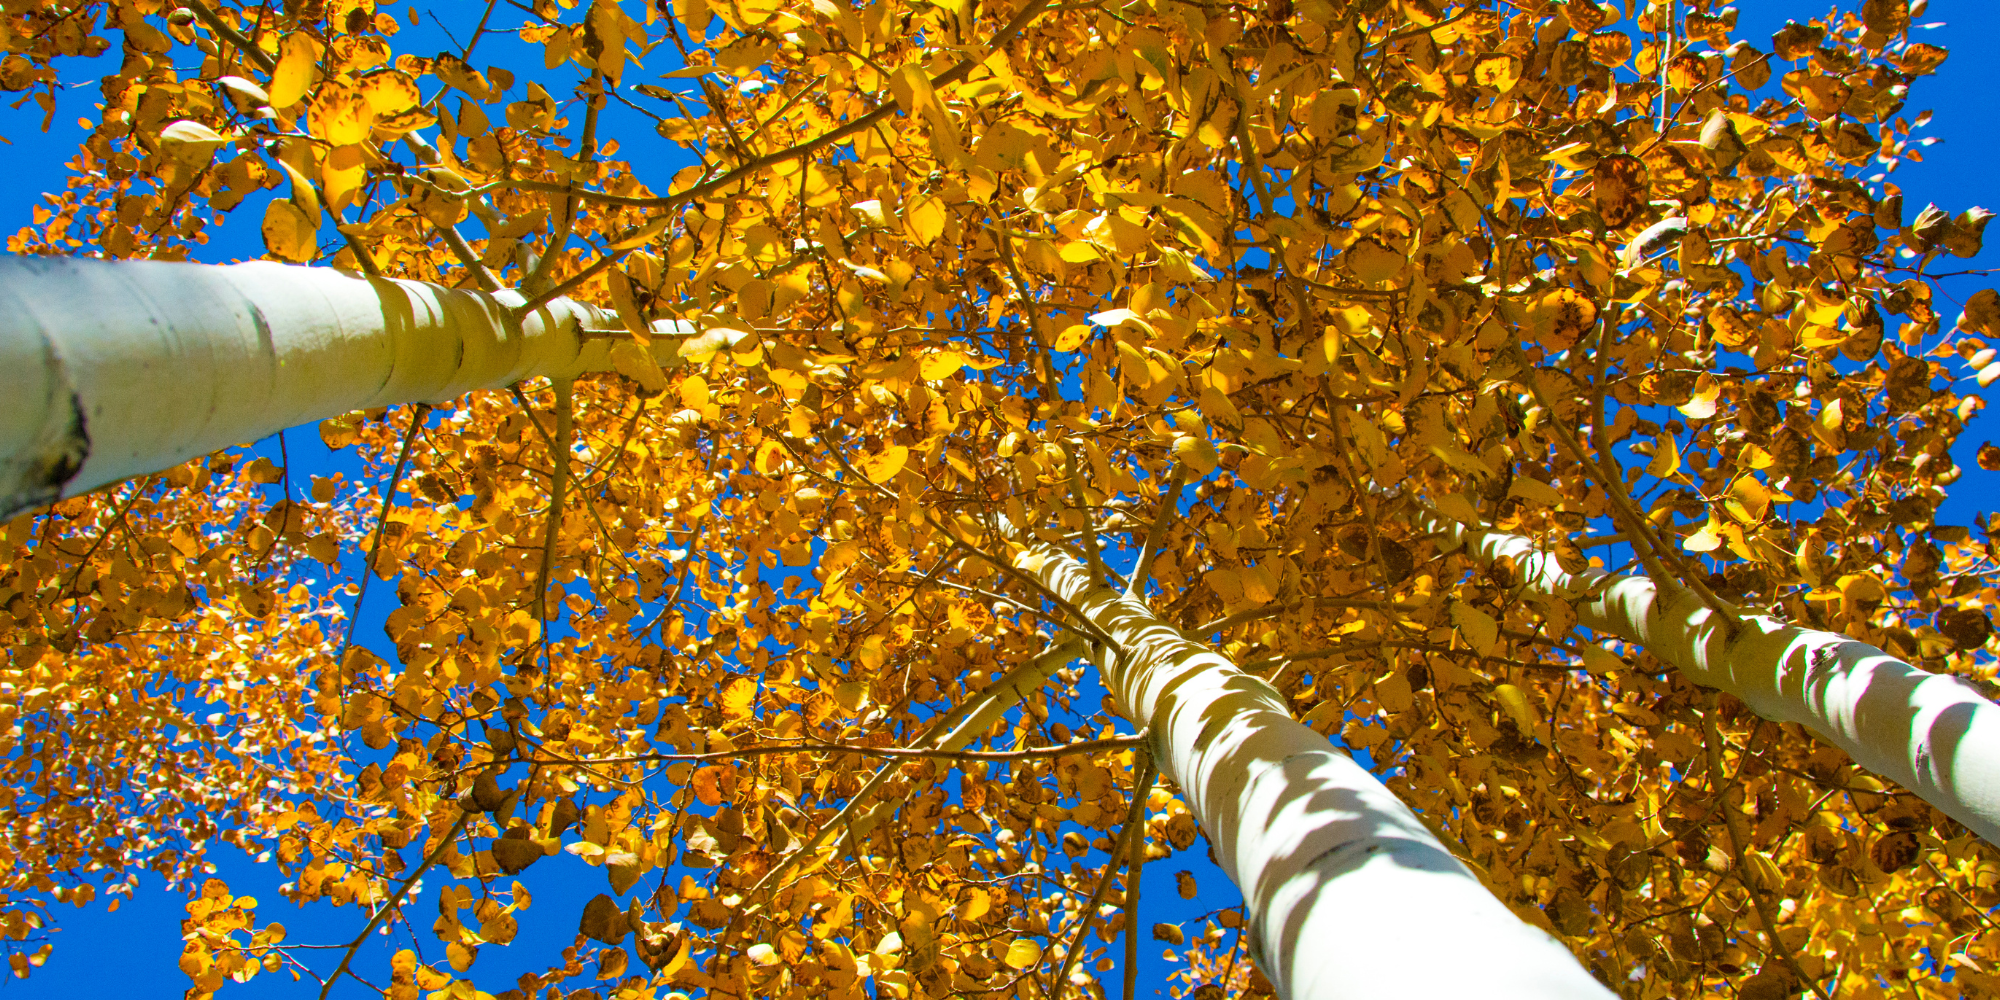 view looking up at an aspen grove during the fall. The sky behind the yellow leaves is a bright blue.